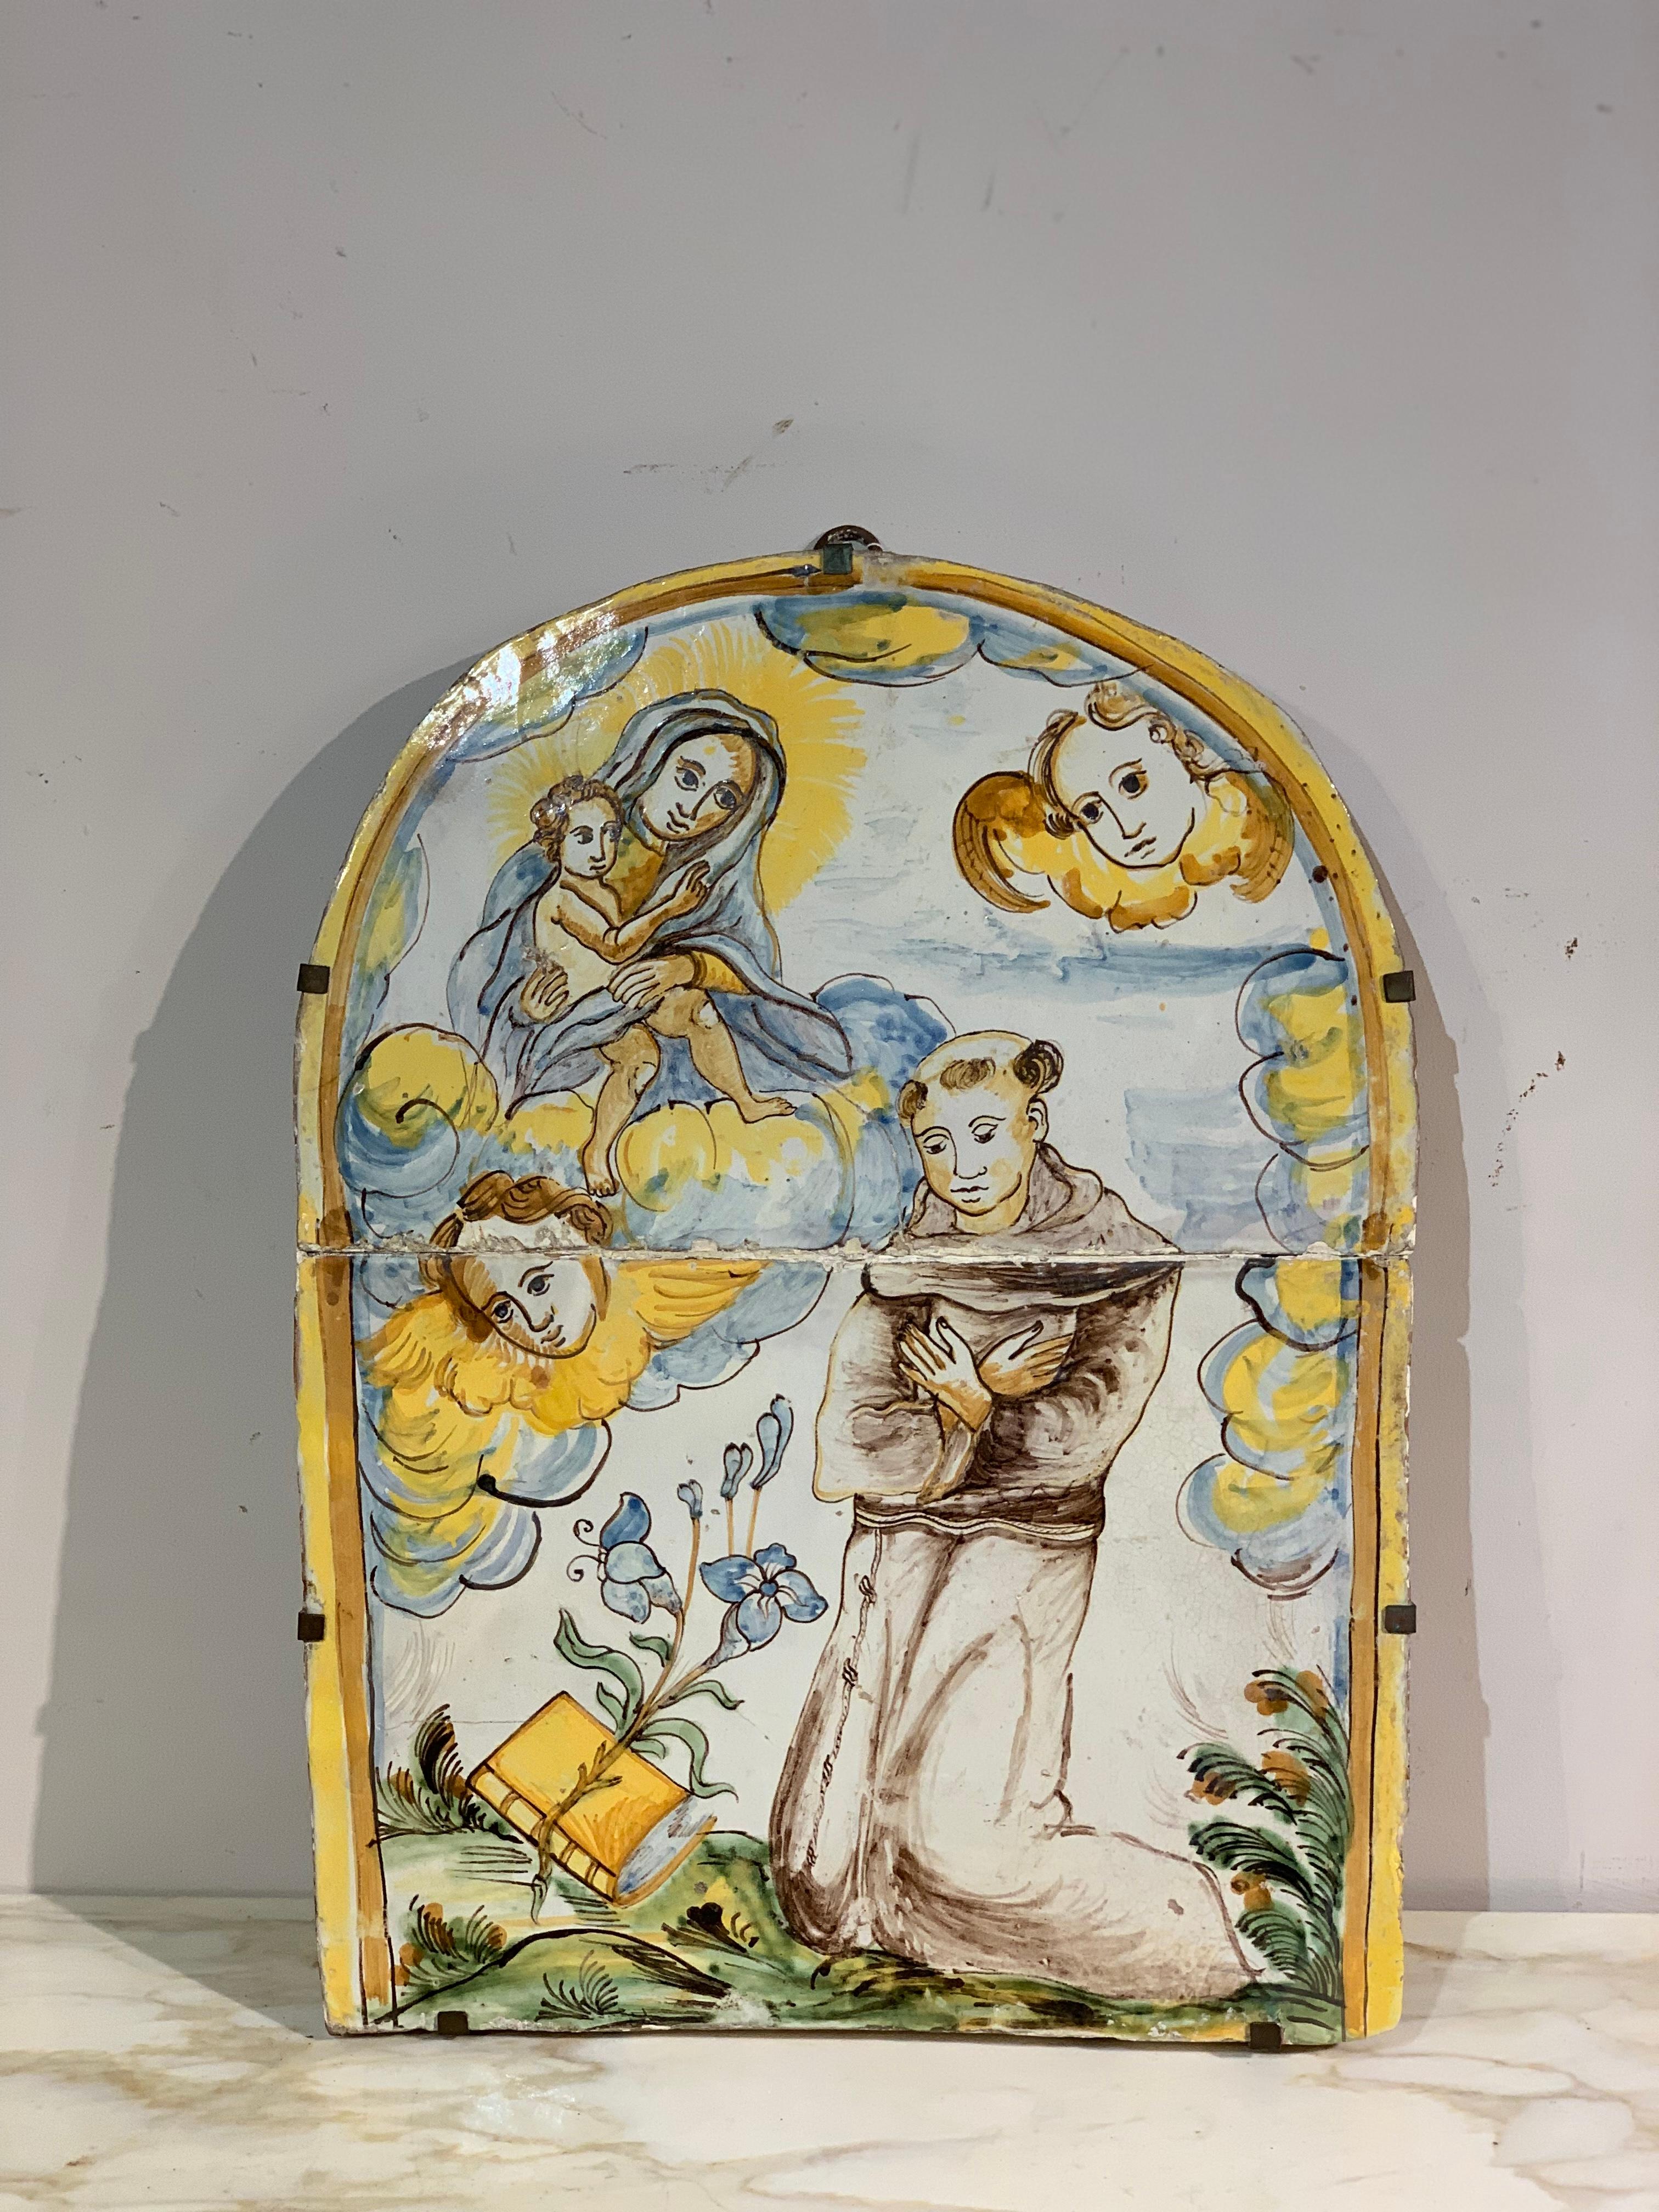 Beautiful tabernacle plaque in polychrome majolica, depicting the Madonna with child and Saint Anthony of Padua. The design and colors recall the first polychrome majolica from the famous kilns of Montelupo Fiorentino. The setting is quiet and